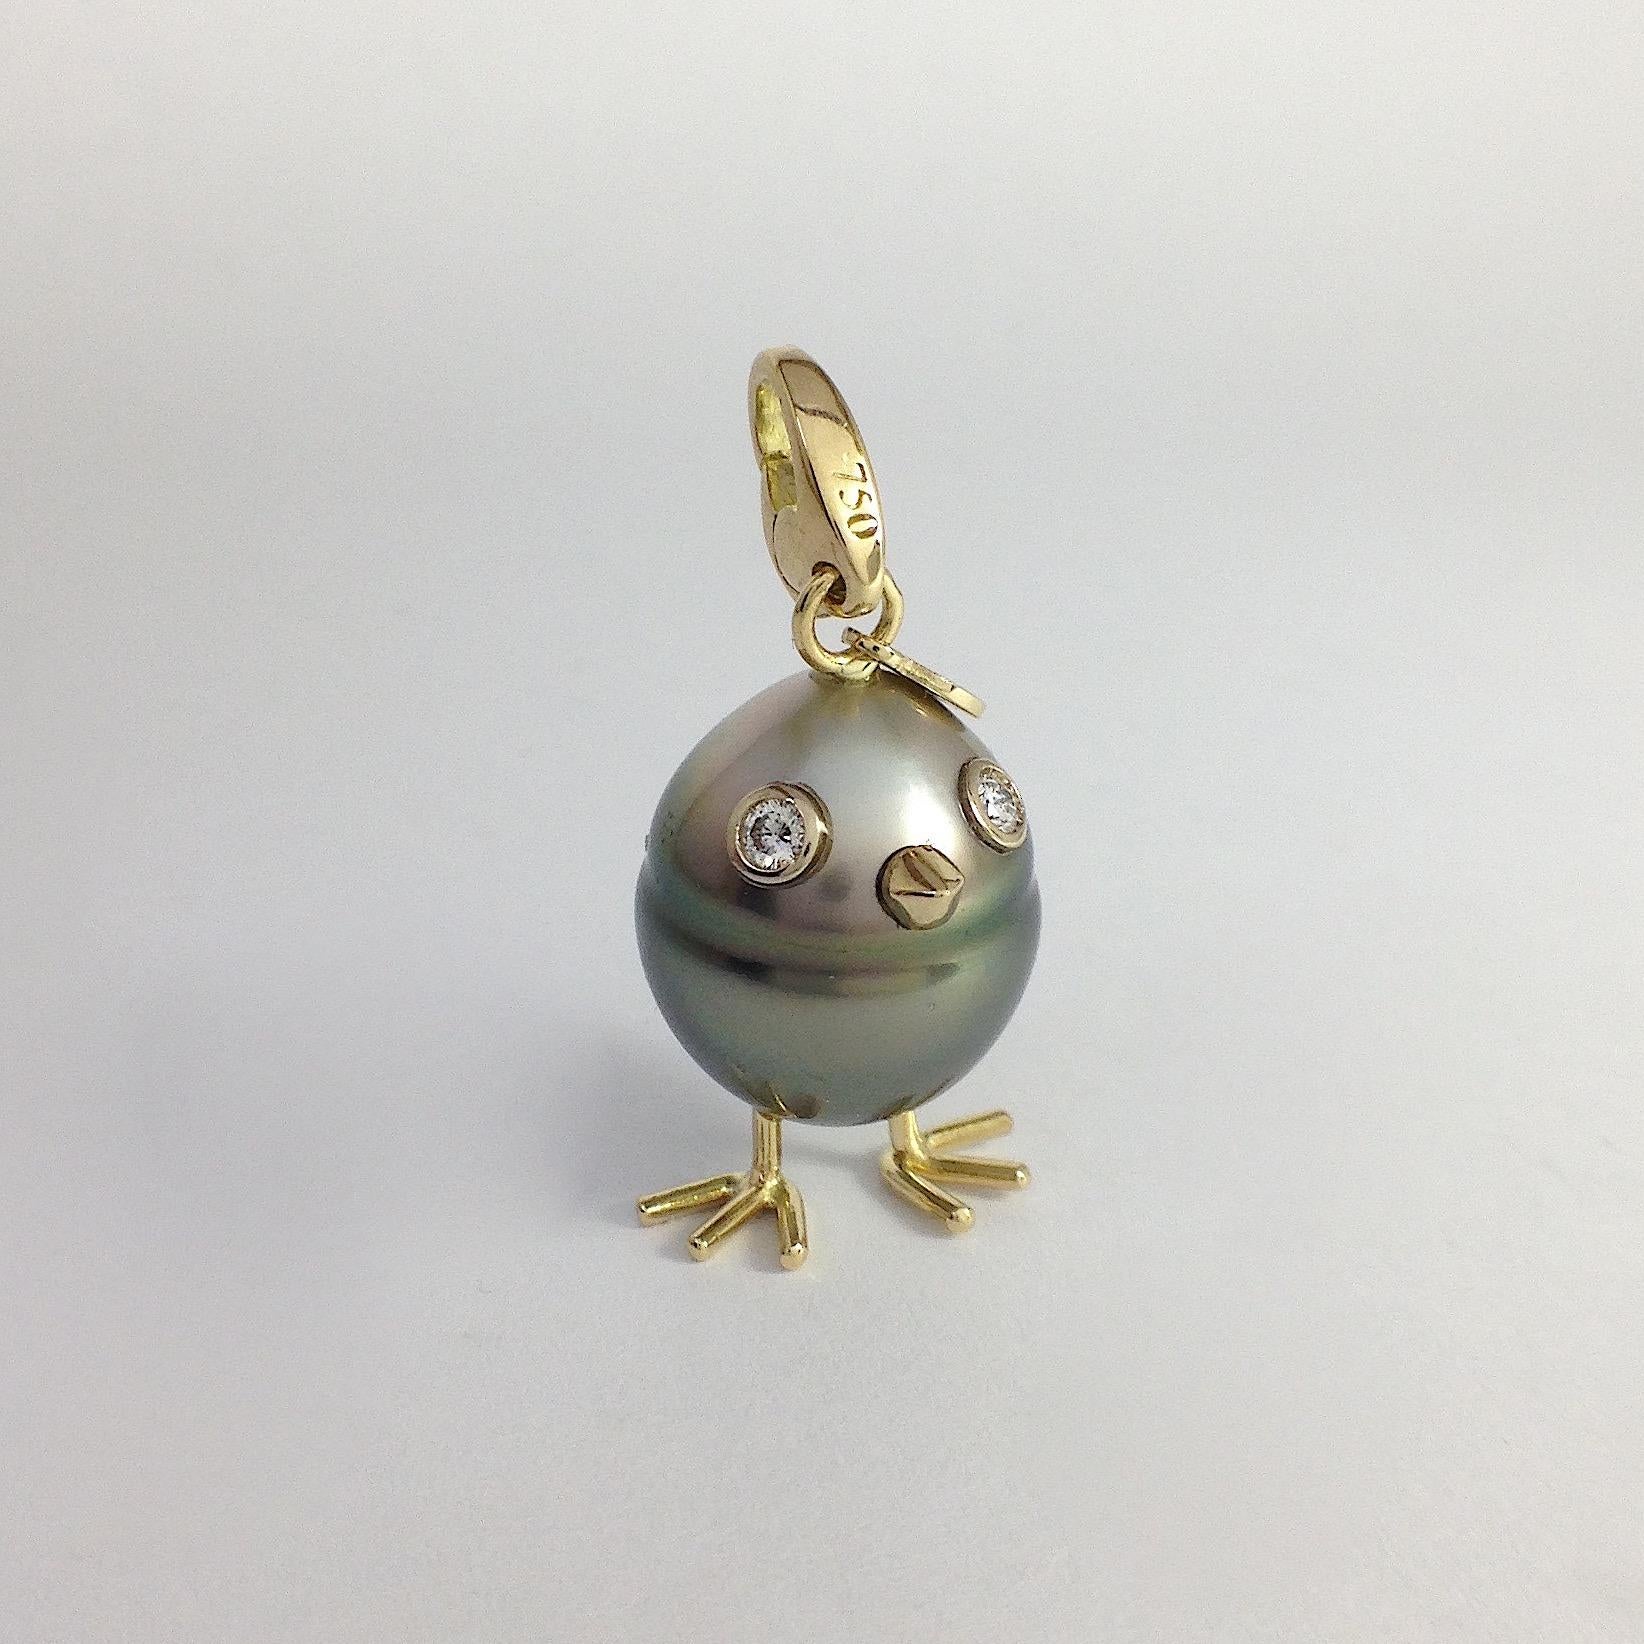 Chick South Sea Pearl White Diamond Gold 18 Kt Pendant Necklace or Charm
A beautiful Tahitian pearl has been carefully crafted to make a chick. He has his two legs, two eyes encrusted with two white diamonds and his beak. 
The gold is white for the